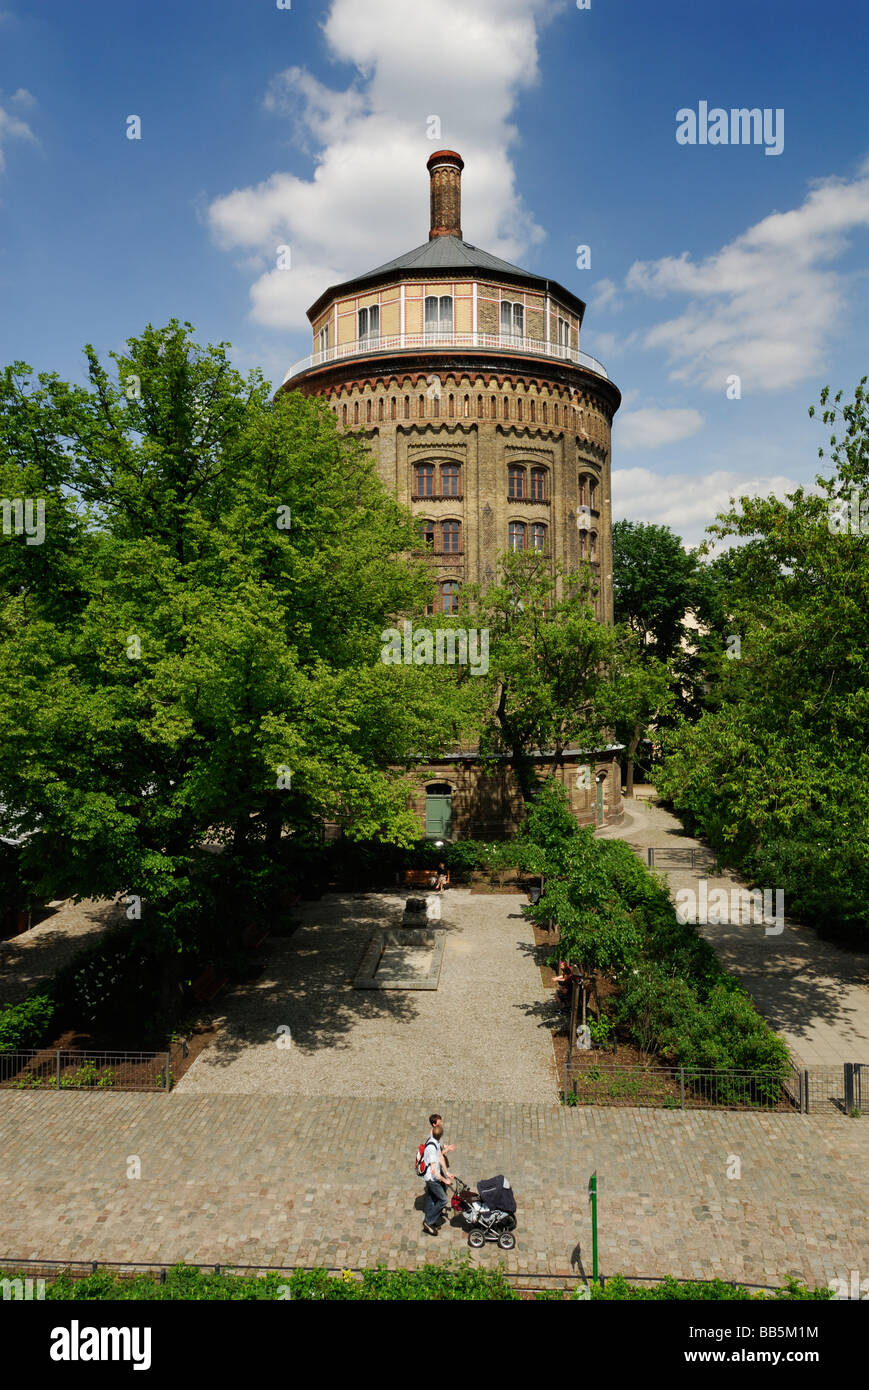 Berlin Germany Wasserturm brick water tower designed by Henry Gill and built by the English Waterworks Company (1877) in Prenzlauer Berg Stock Photo